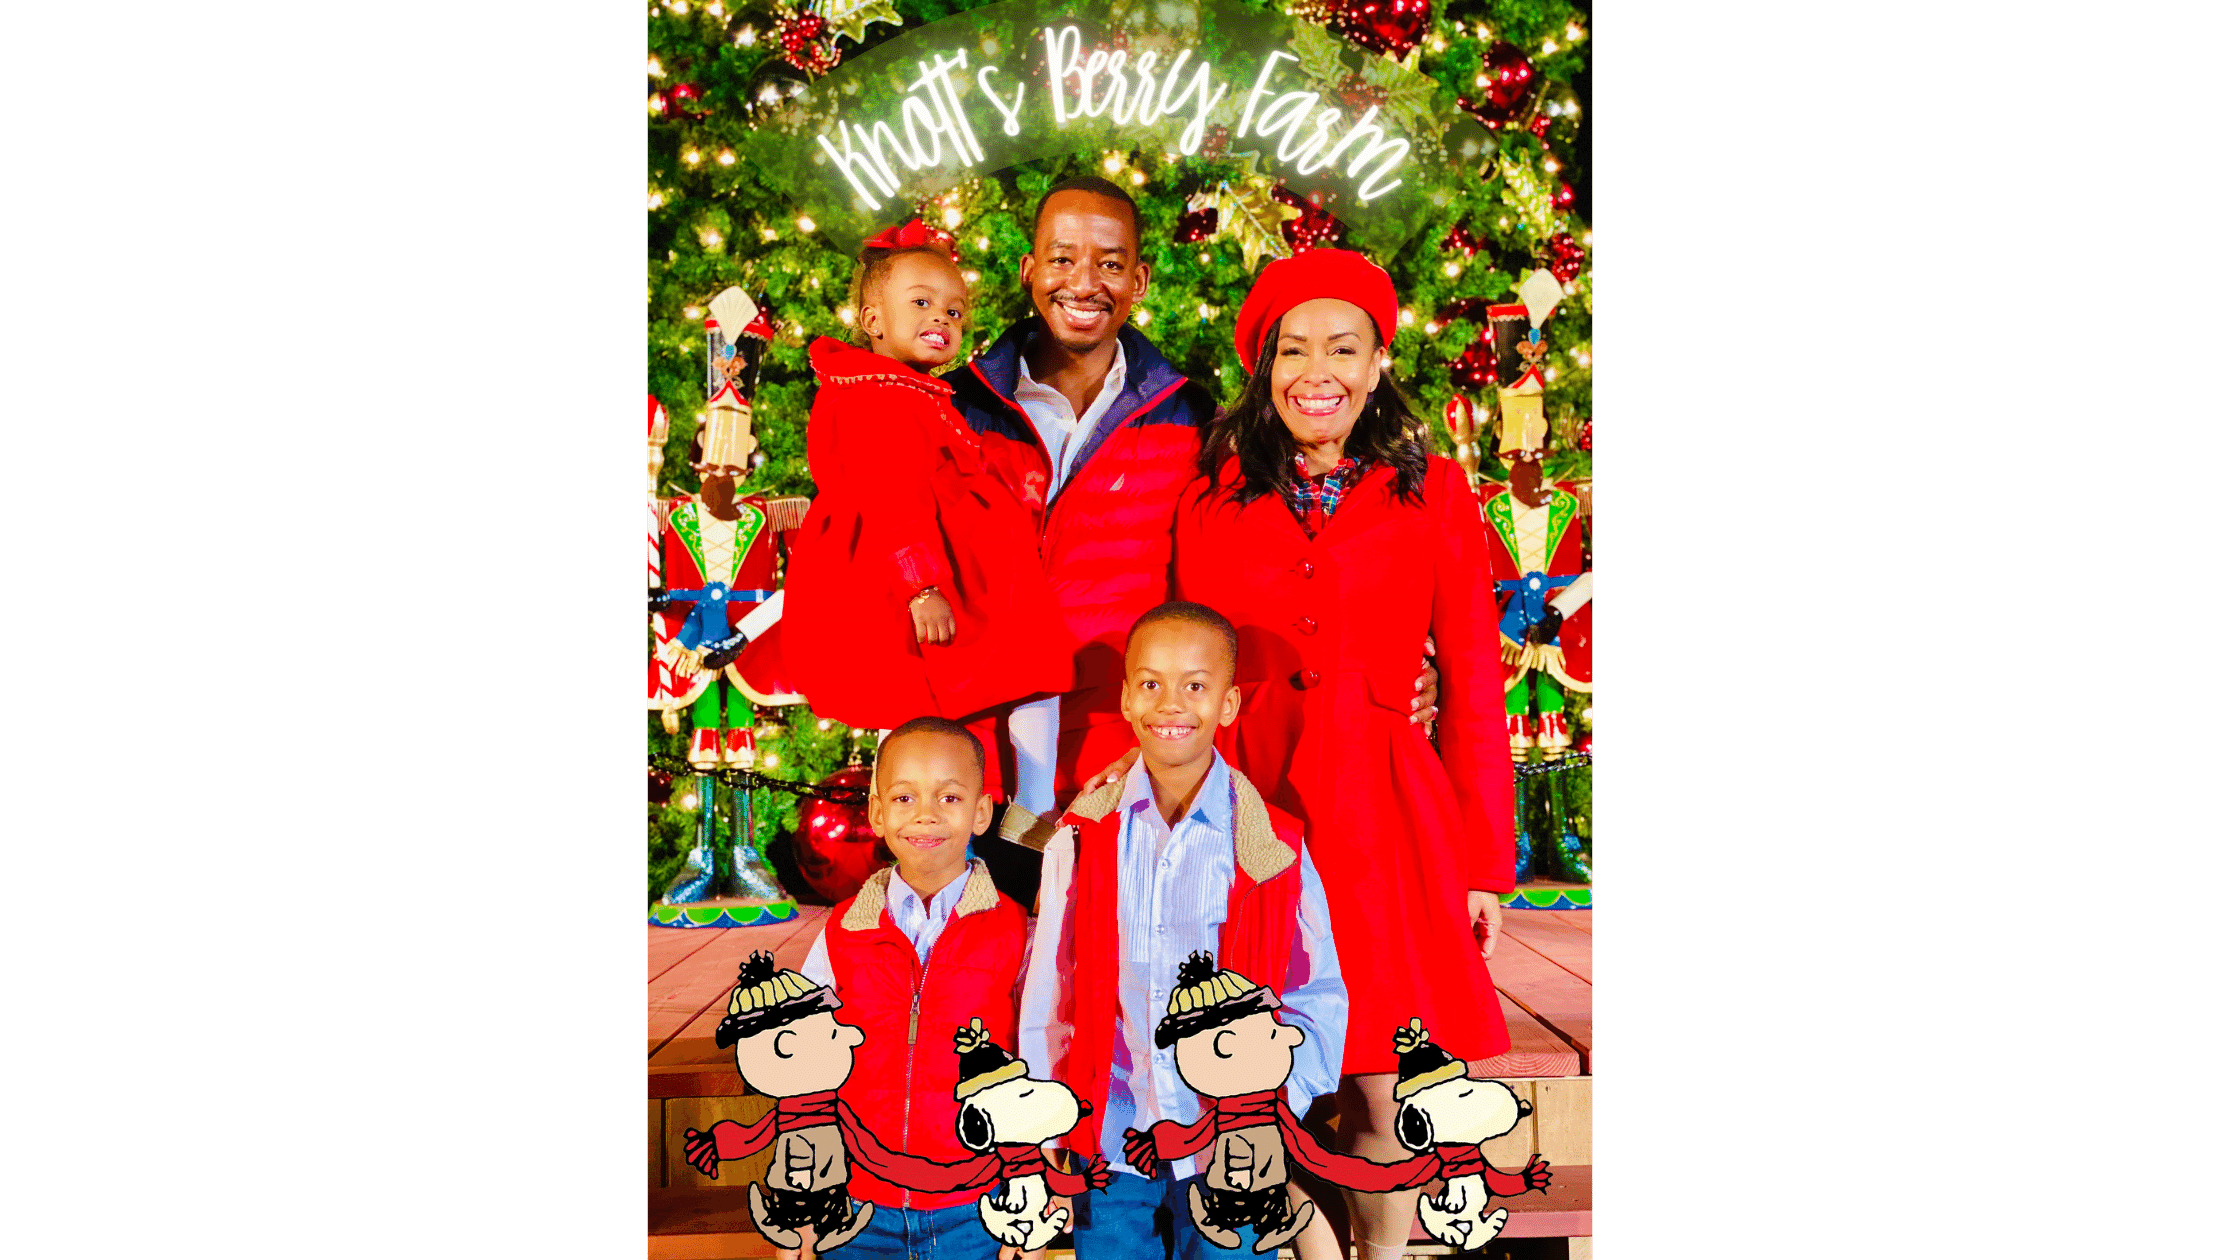 Family dressed in red for Christmas festival at Knott's